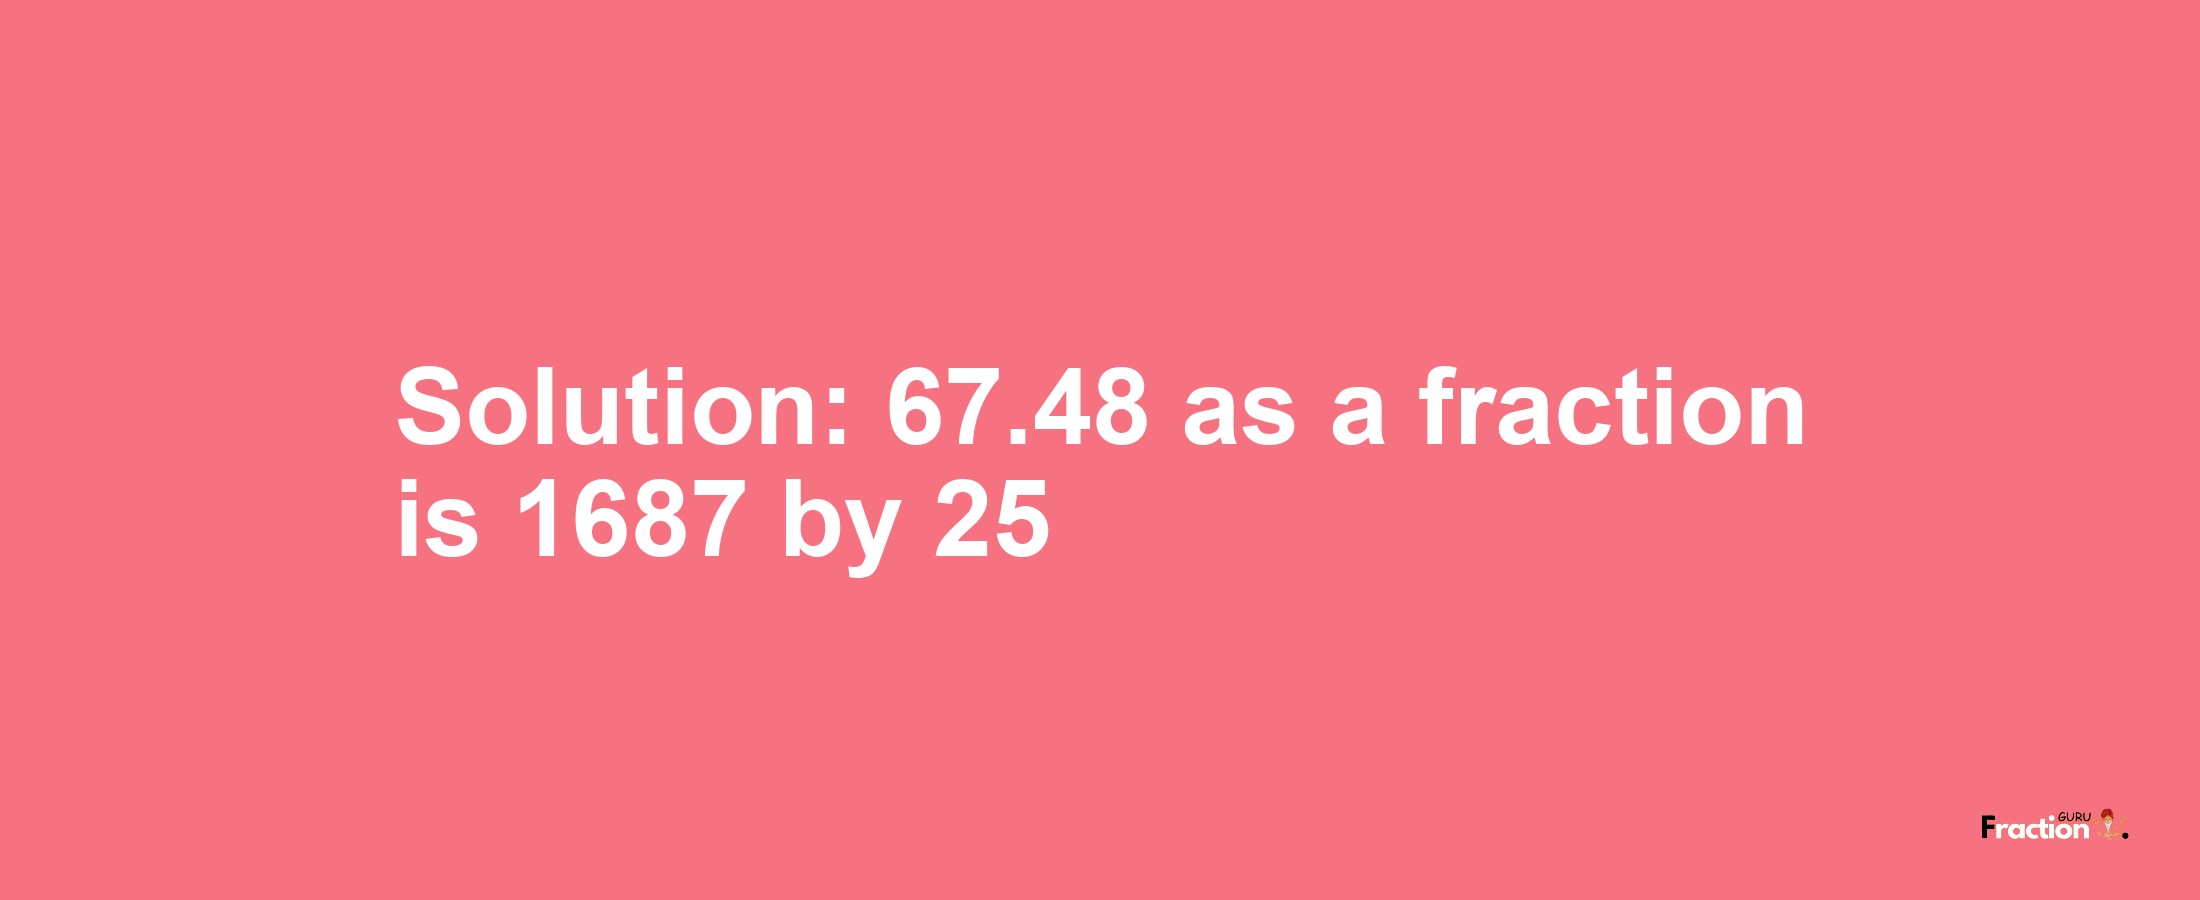 Solution:67.48 as a fraction is 1687/25